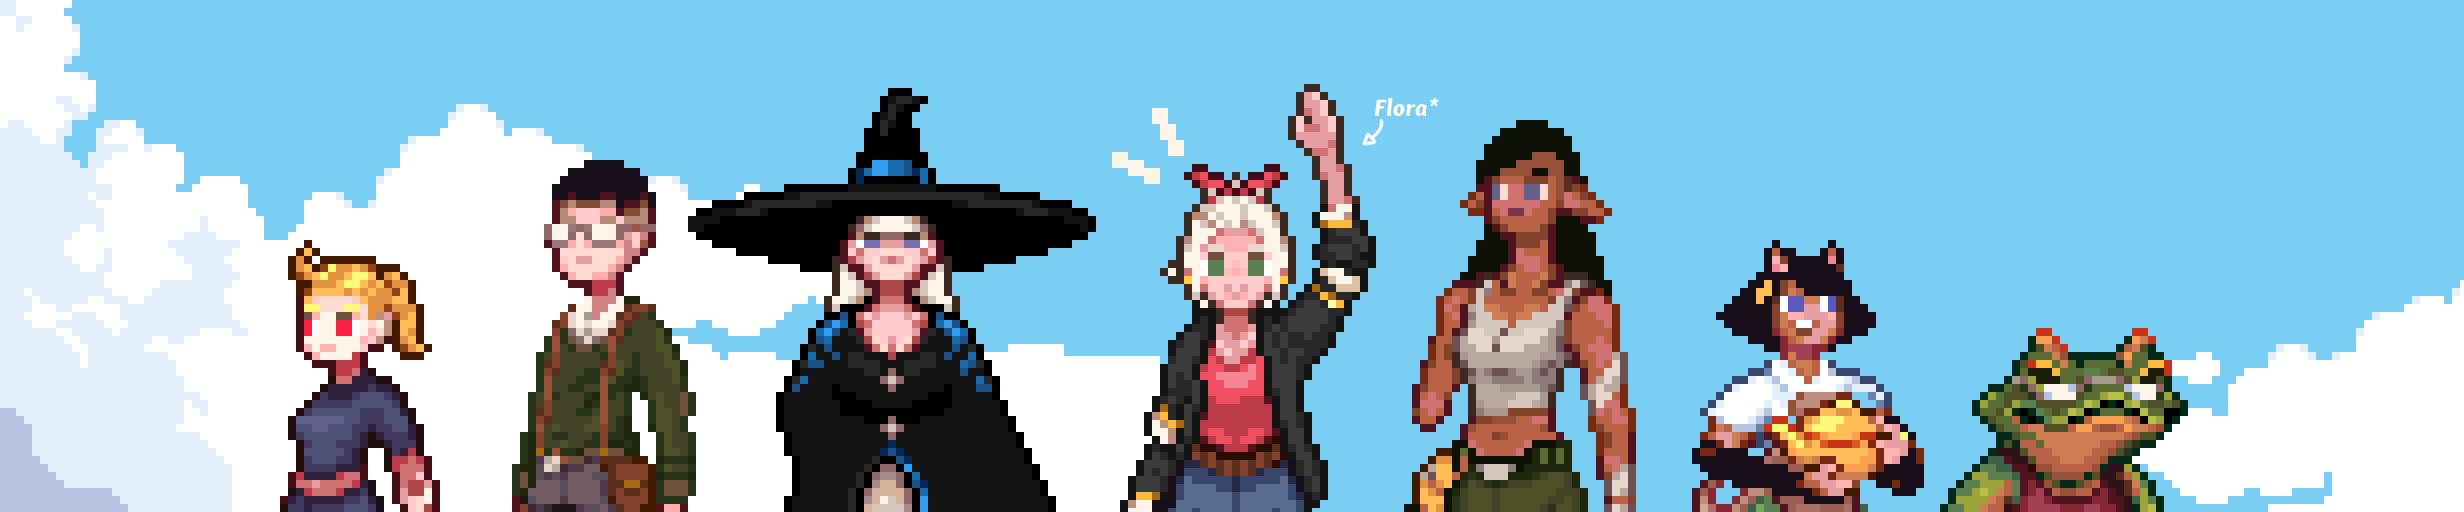 Banner of Flora and six other Characters in front of clouds. Flora waves towards you.